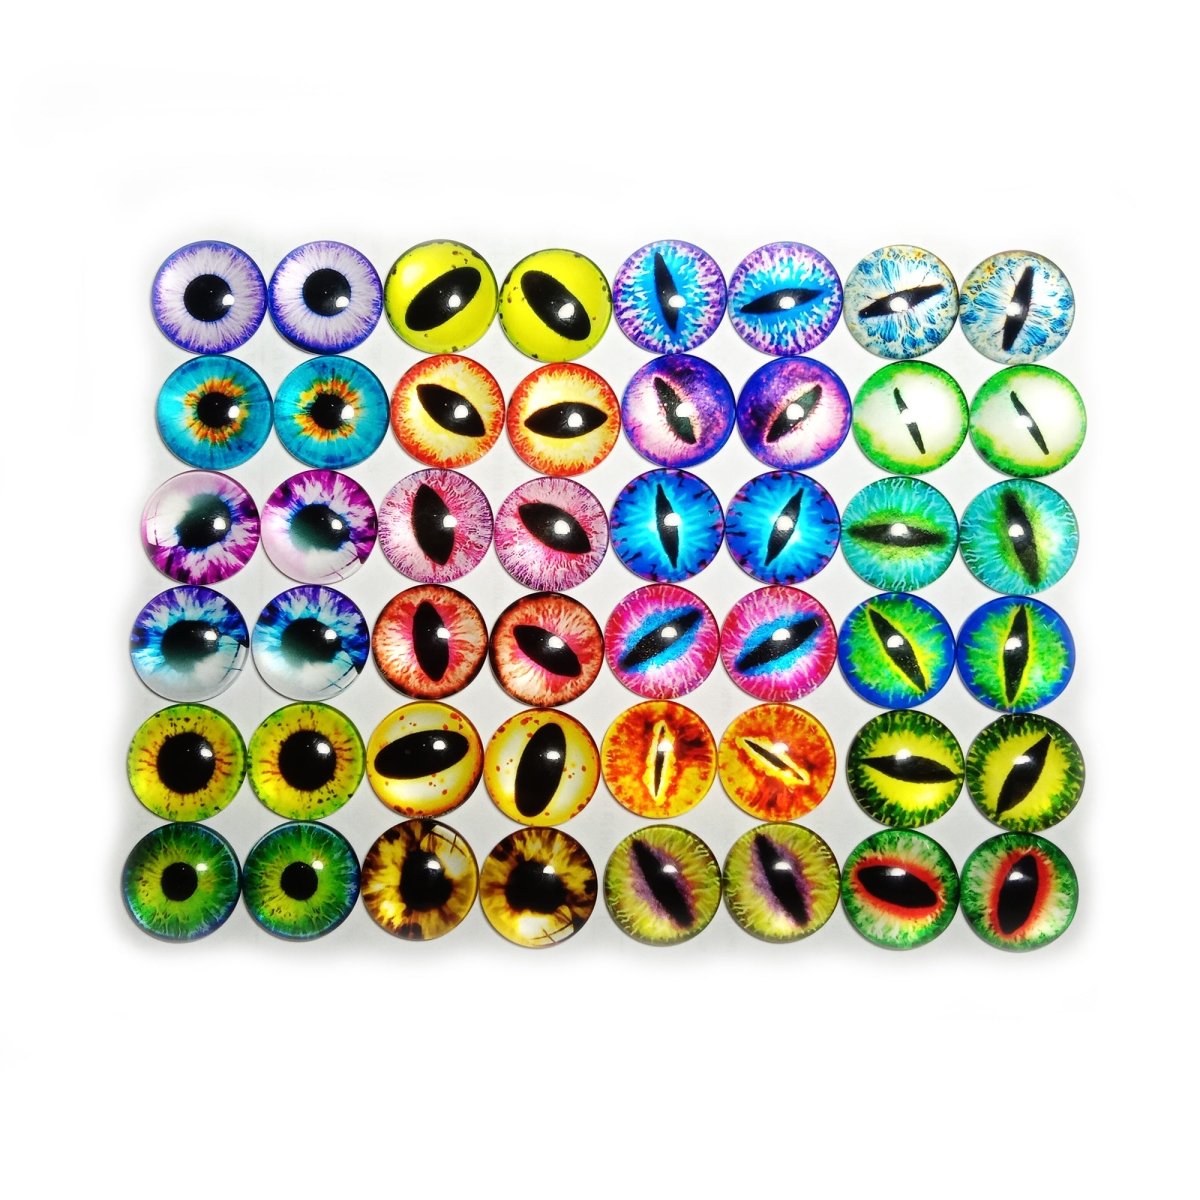 18mm 20mm 25mm 30mm Glass Eyes Dragon Lizard Frog Eyeballs As Pictured - 20mm 48pcs - - Asia Sell